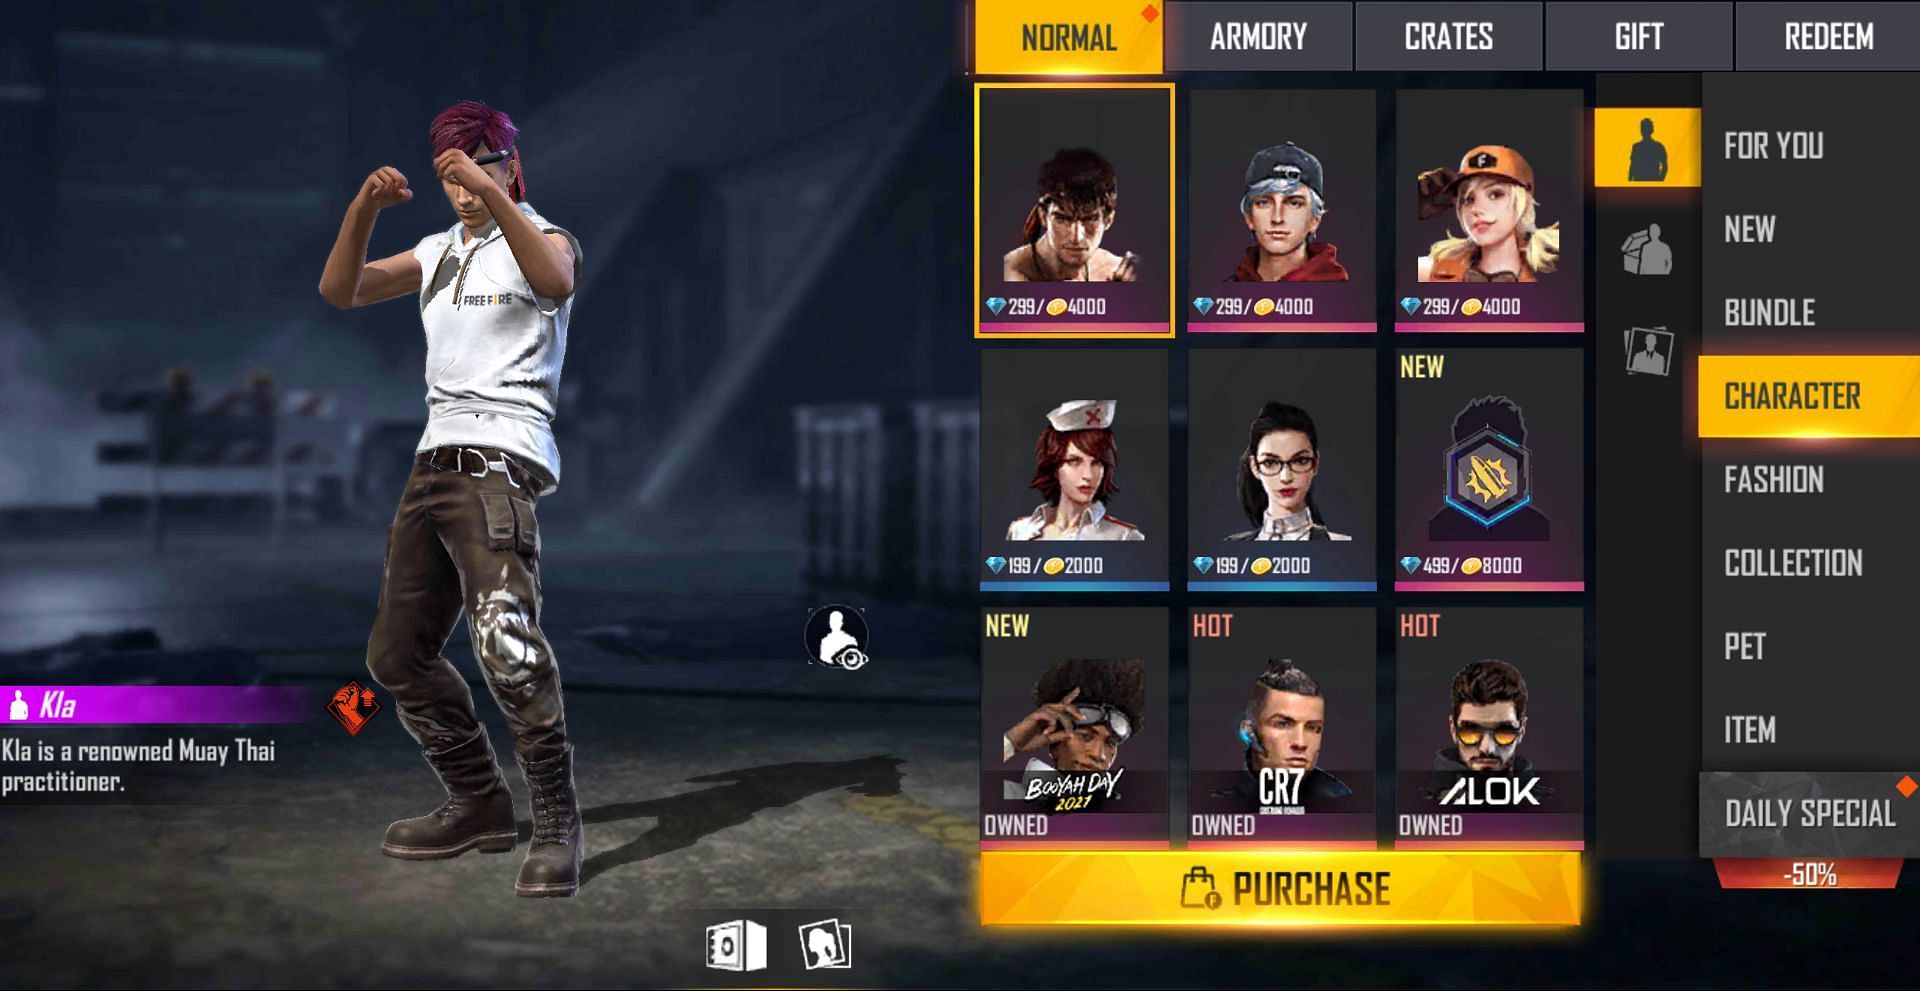 To buy Kla, players can either use Gold or Diamonds (Image via Free Fire)